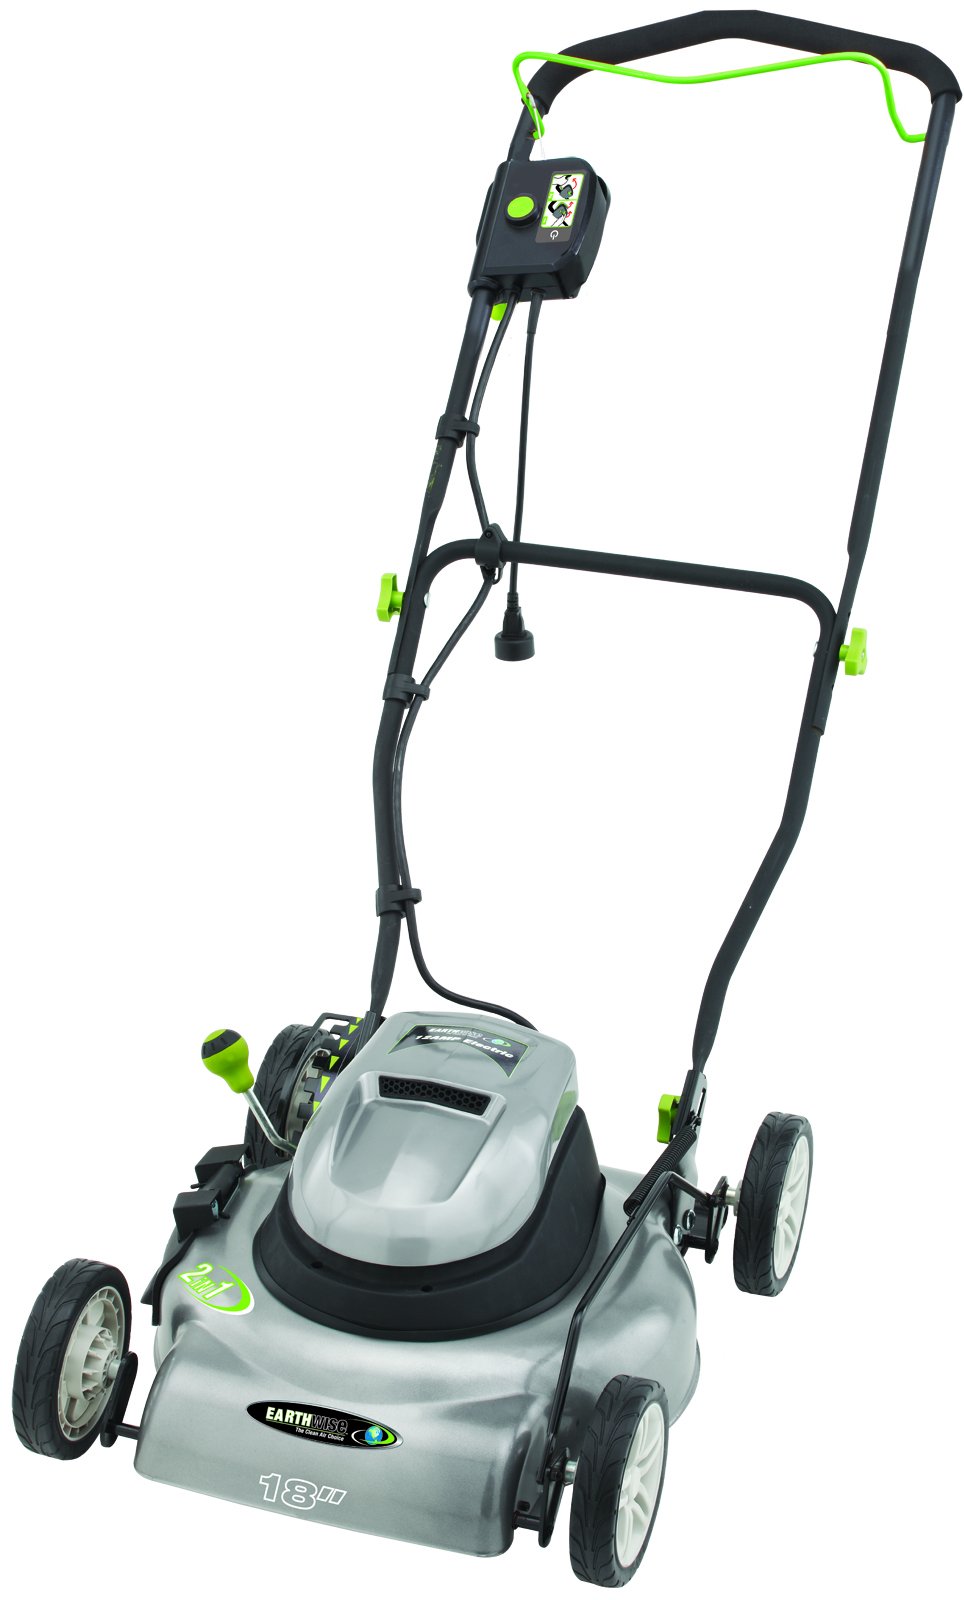 lw1-6 Small lawn mower options that you can buy online